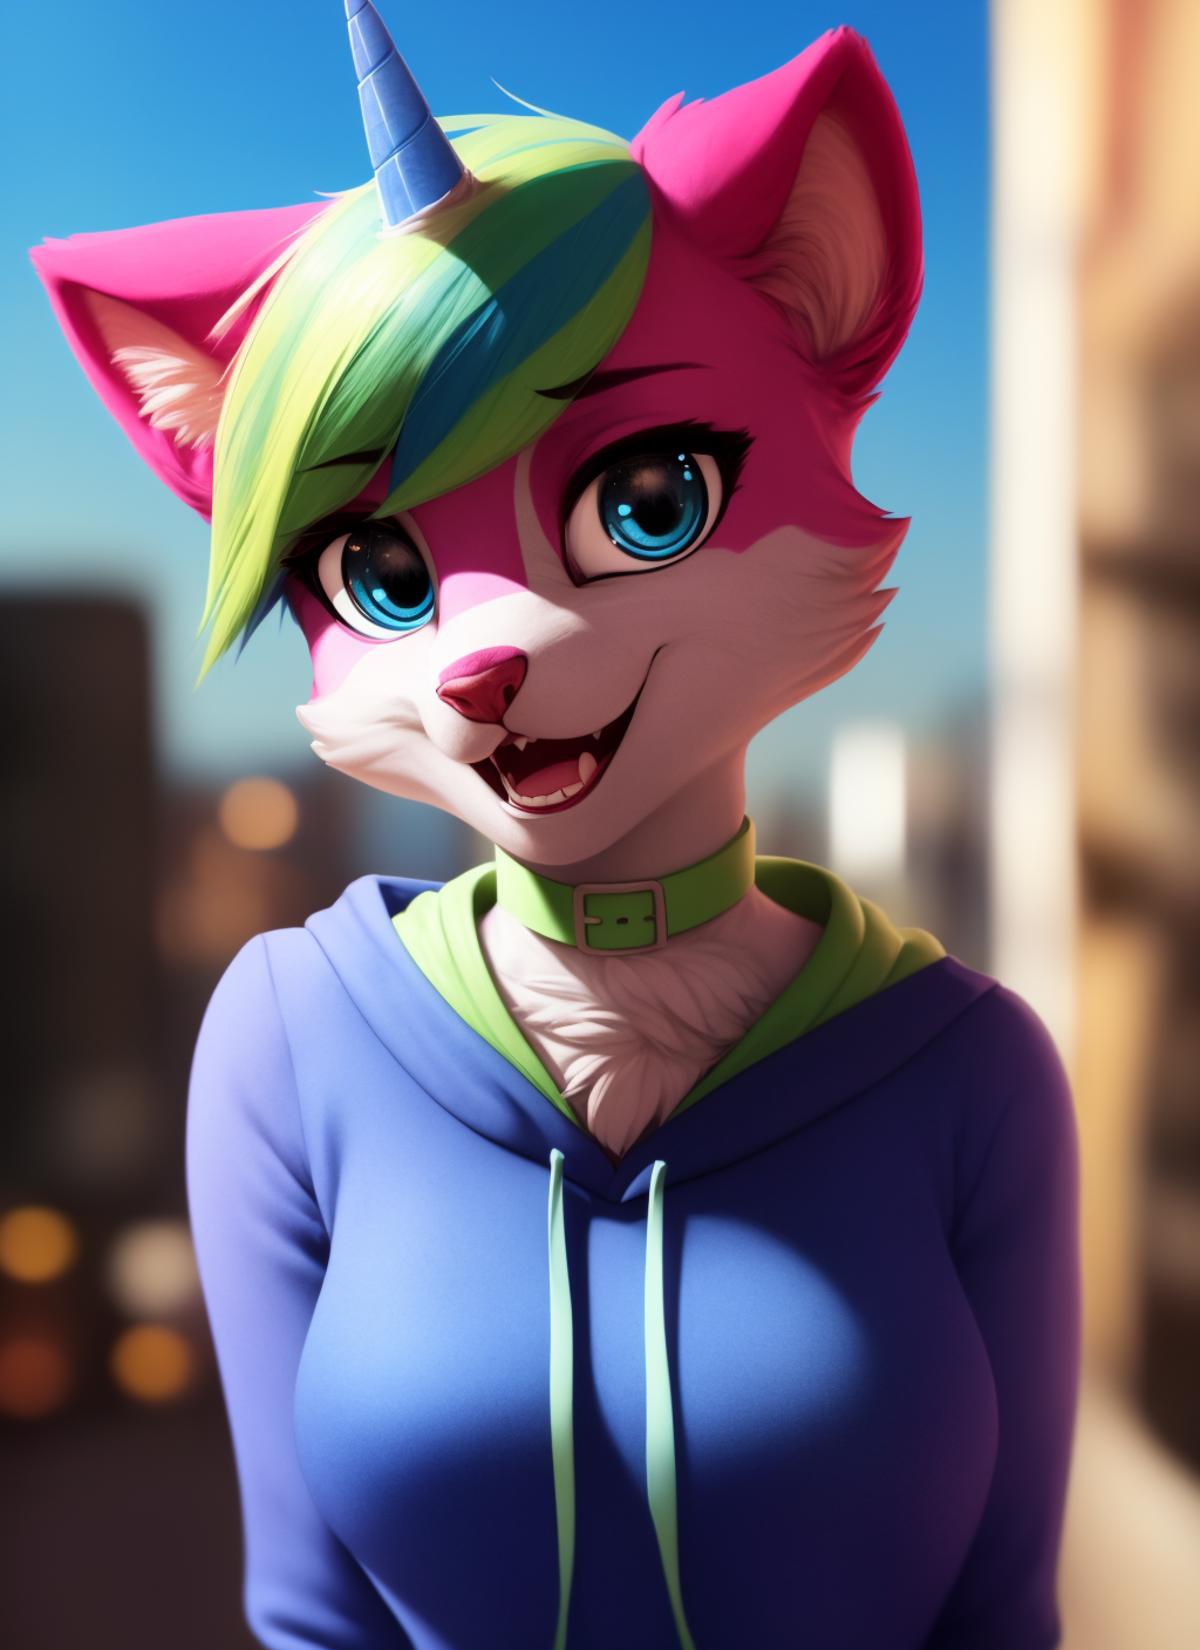 Unico-Something-Furry image by FinalEclipse